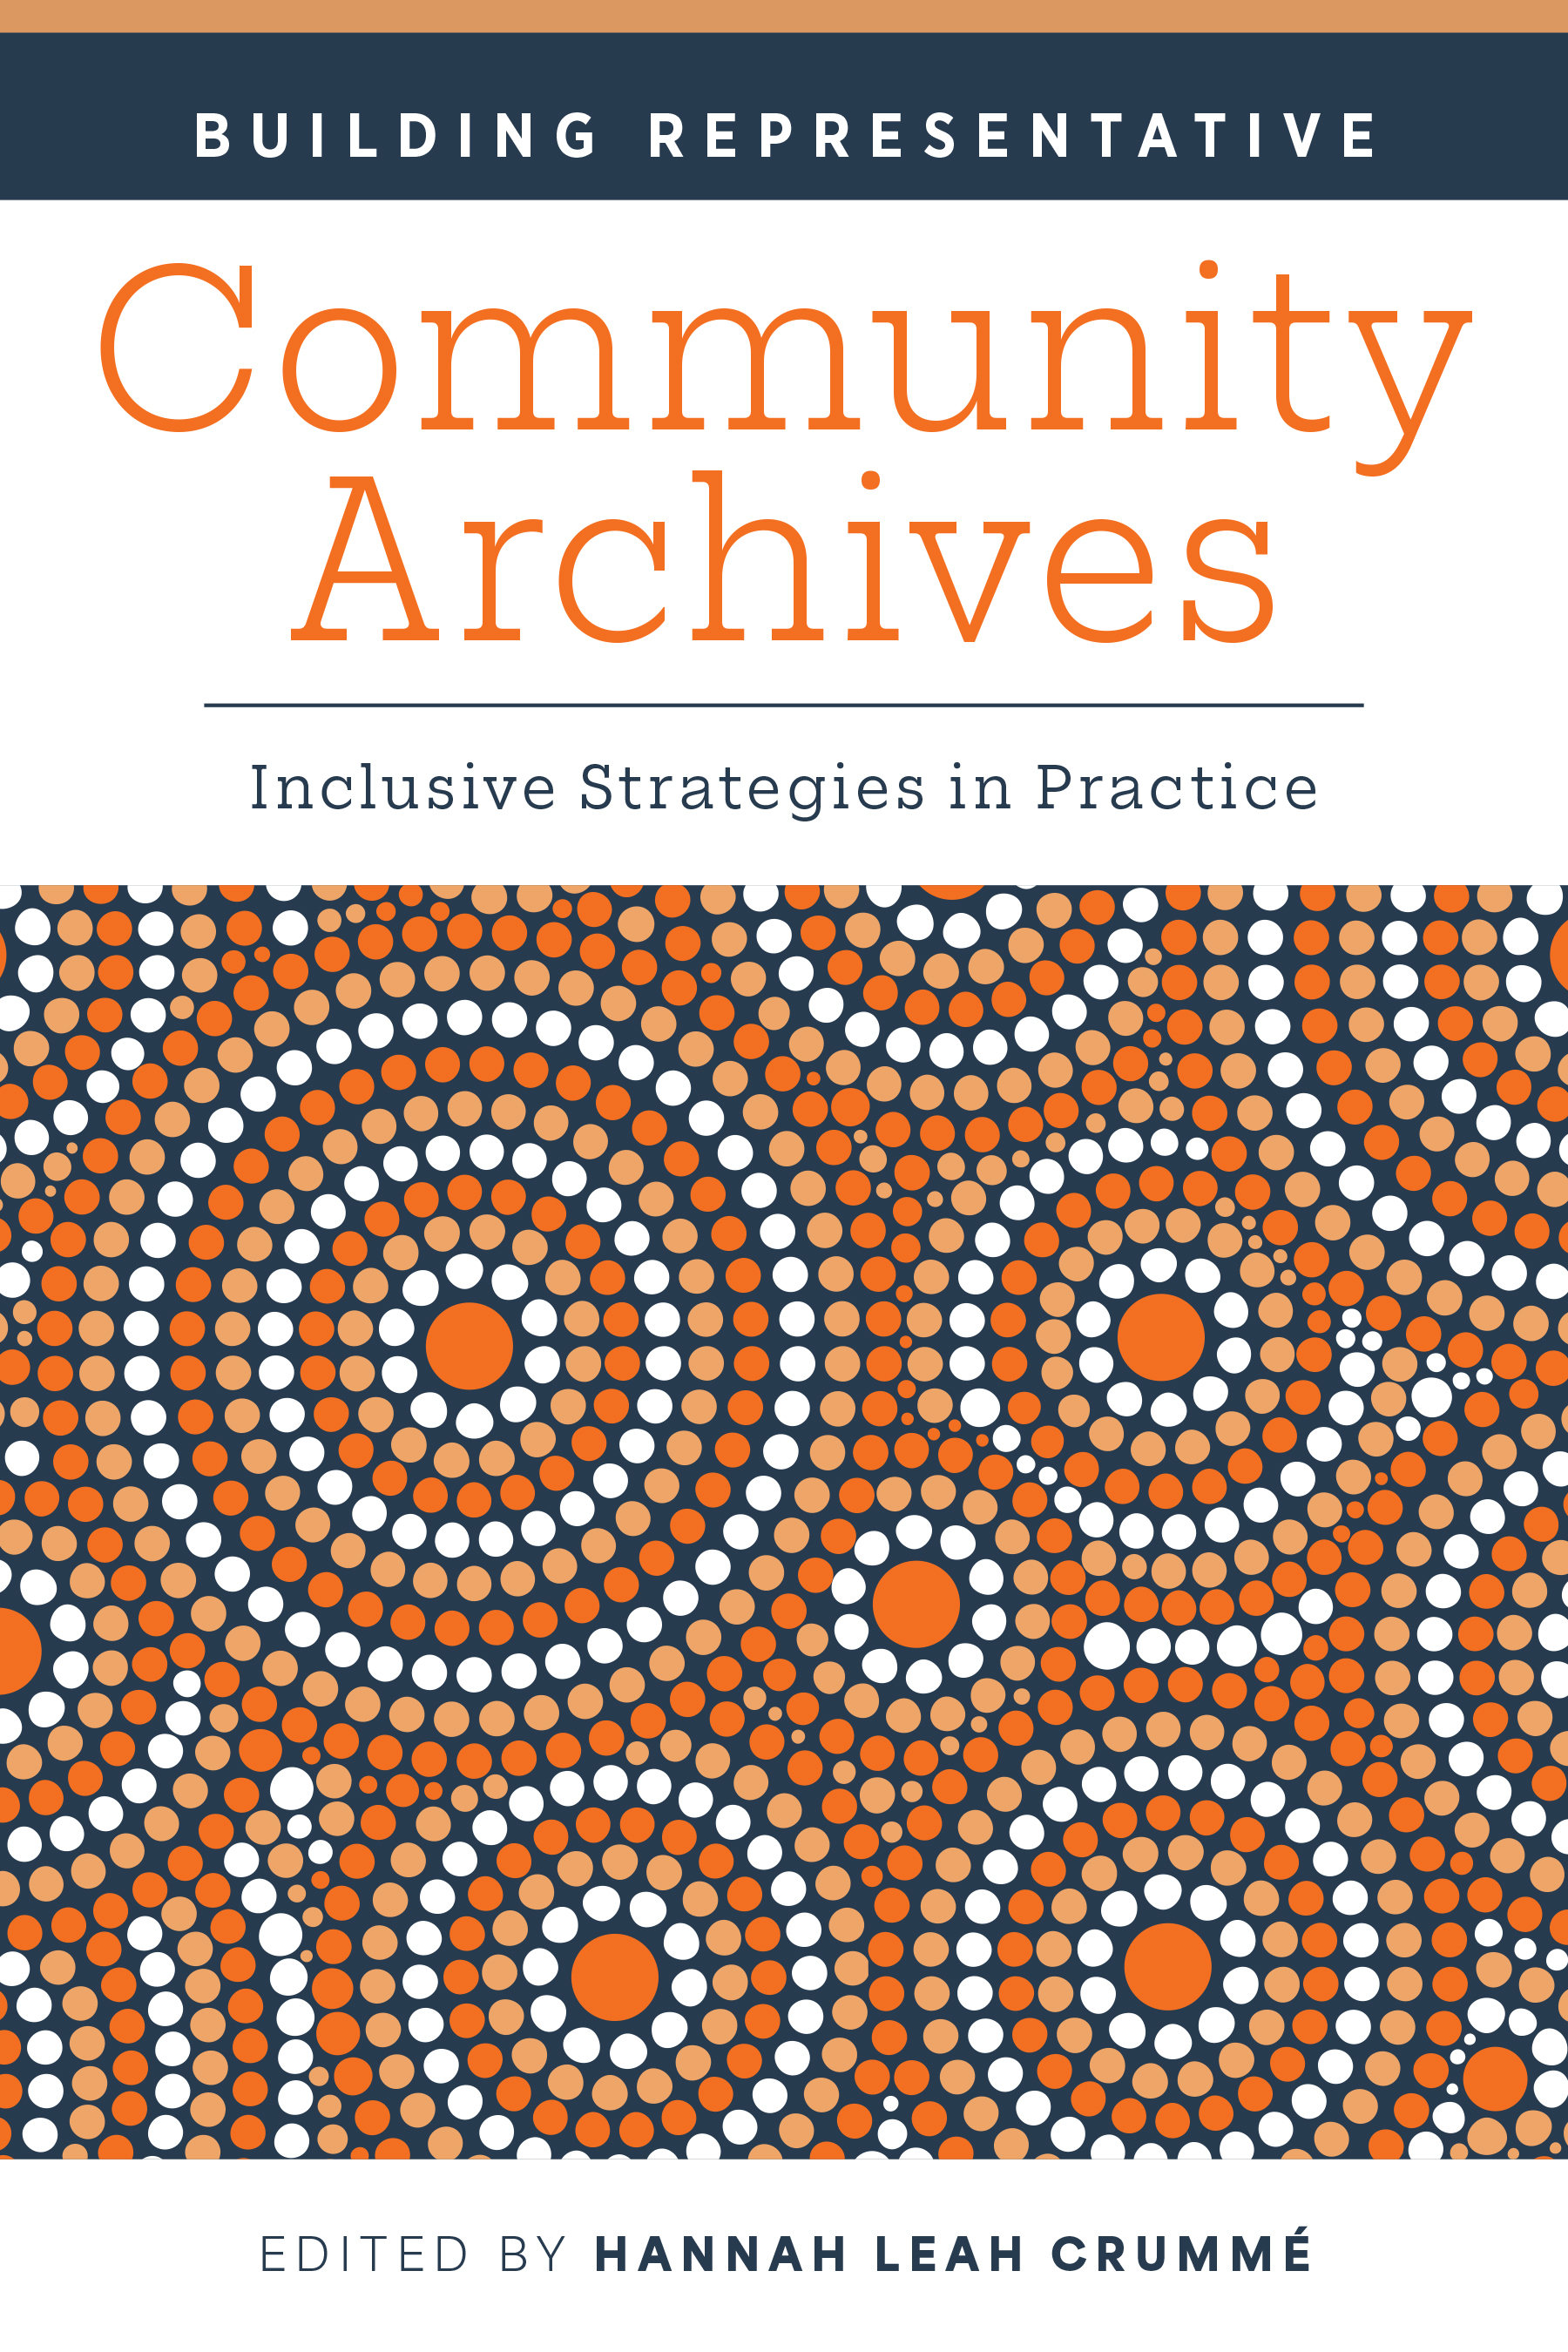 Image for Building Representative Community Archives: Inclusive Strategies in Practice